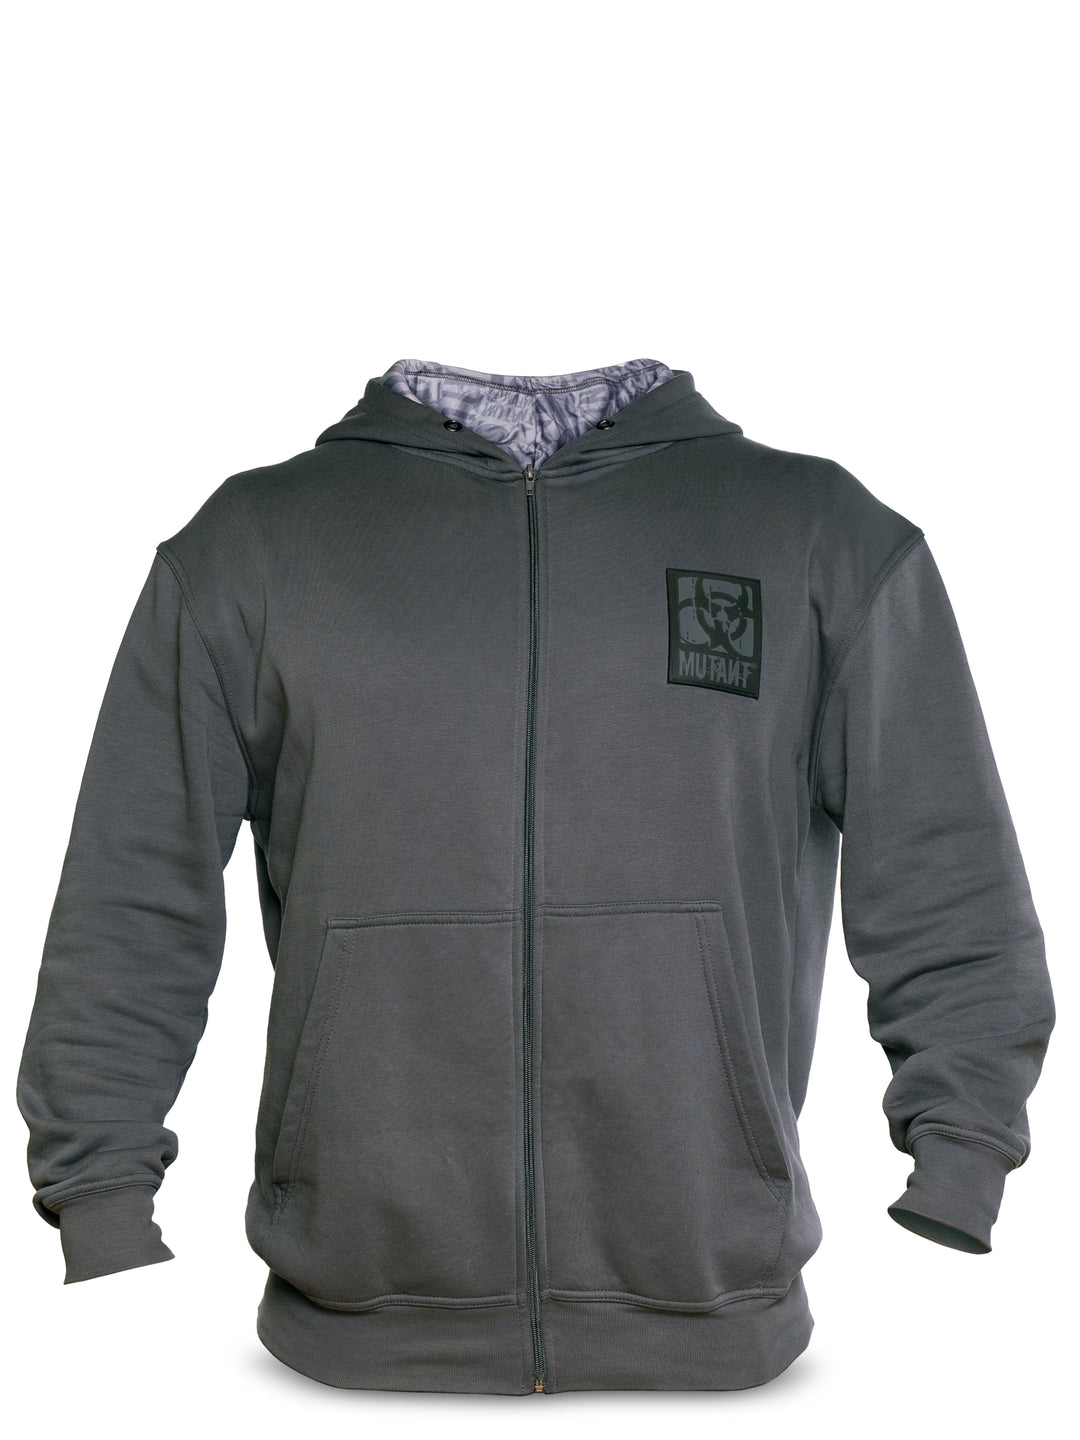 Front view of Grey Mutant Patched Zip-Up Gym Hoodie with black logo patch on left chest, two pockets, and light grey internal hood lining with watermarked Mutant logo. White background